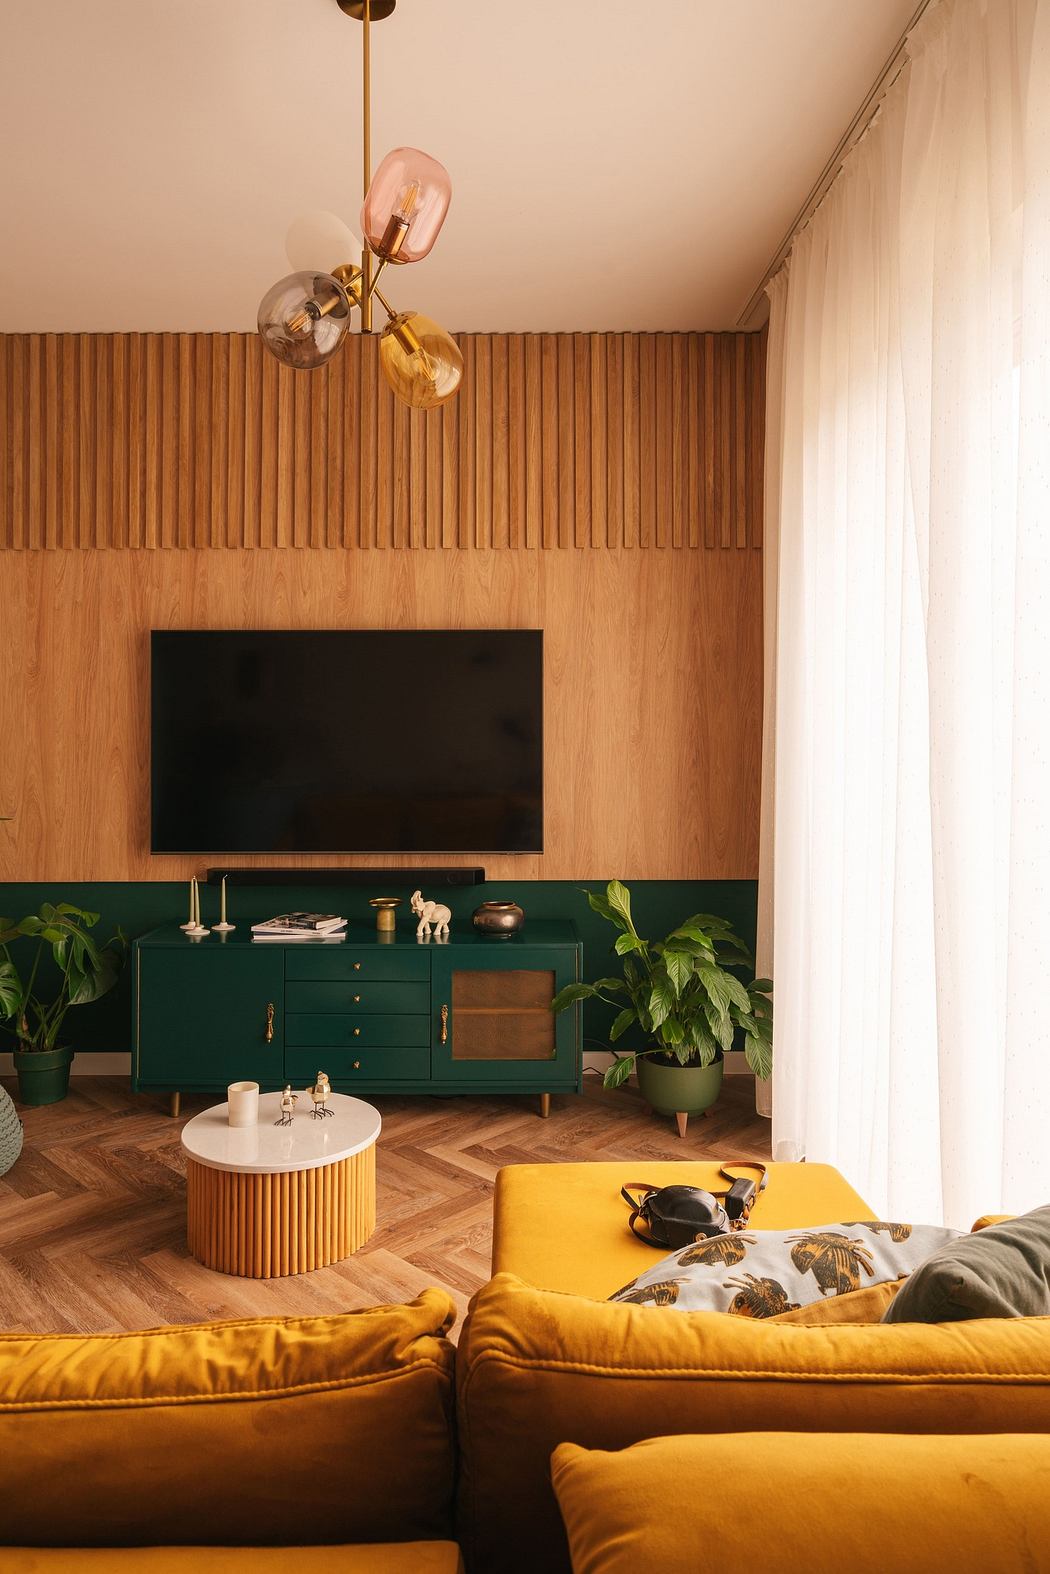 Modern living room with mustard sofa, green cabinet, and wood paneling.